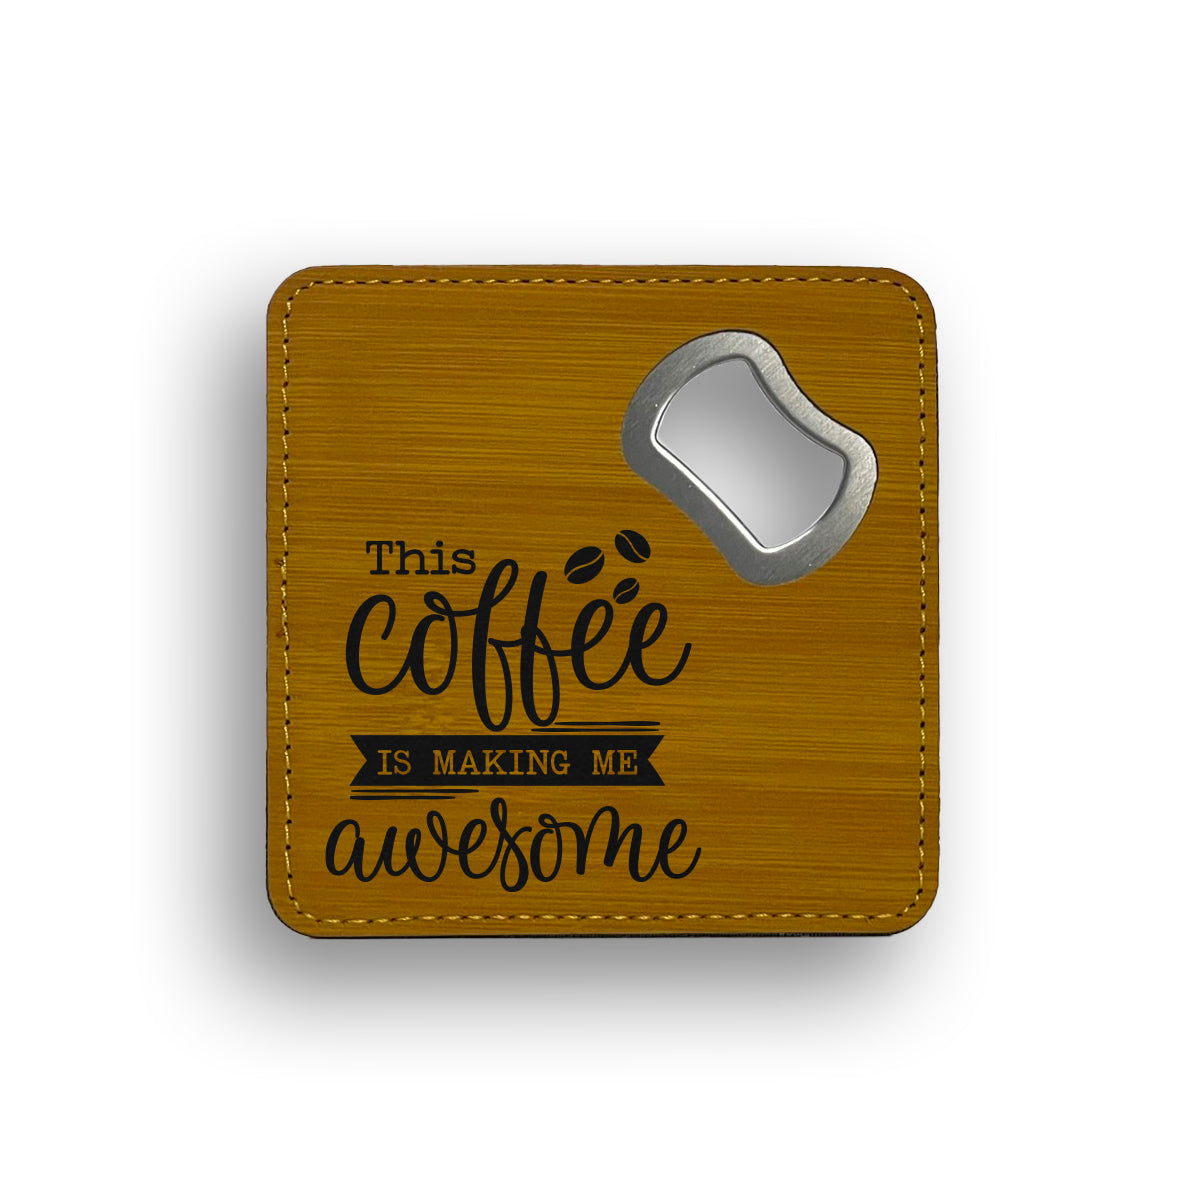 This Coffee Is Making Me Awesome Bottle Opener Coaster